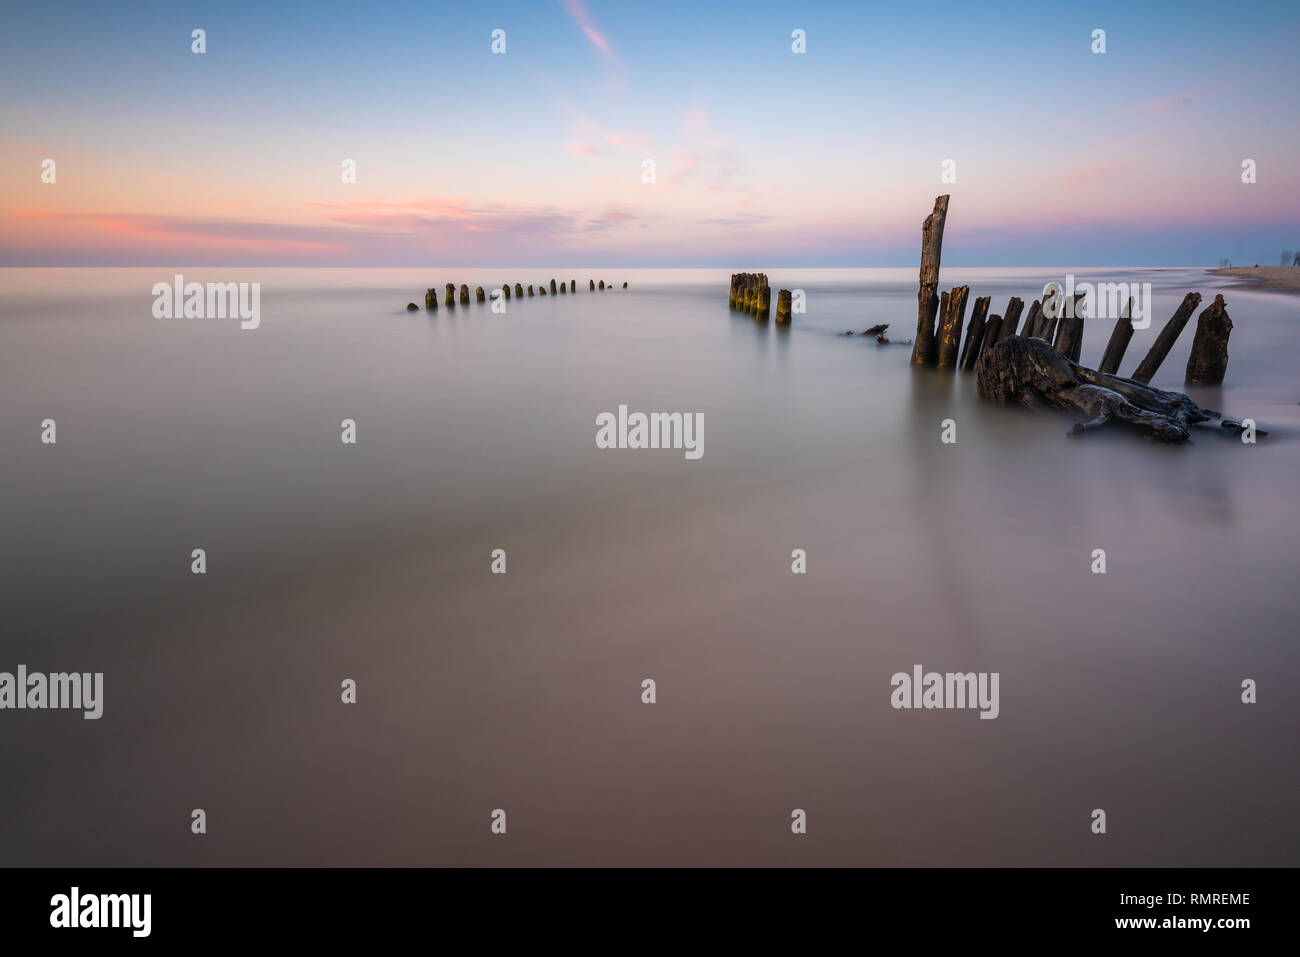 Stakes Breakwater Photos Stakes Breakwater Images Alamy